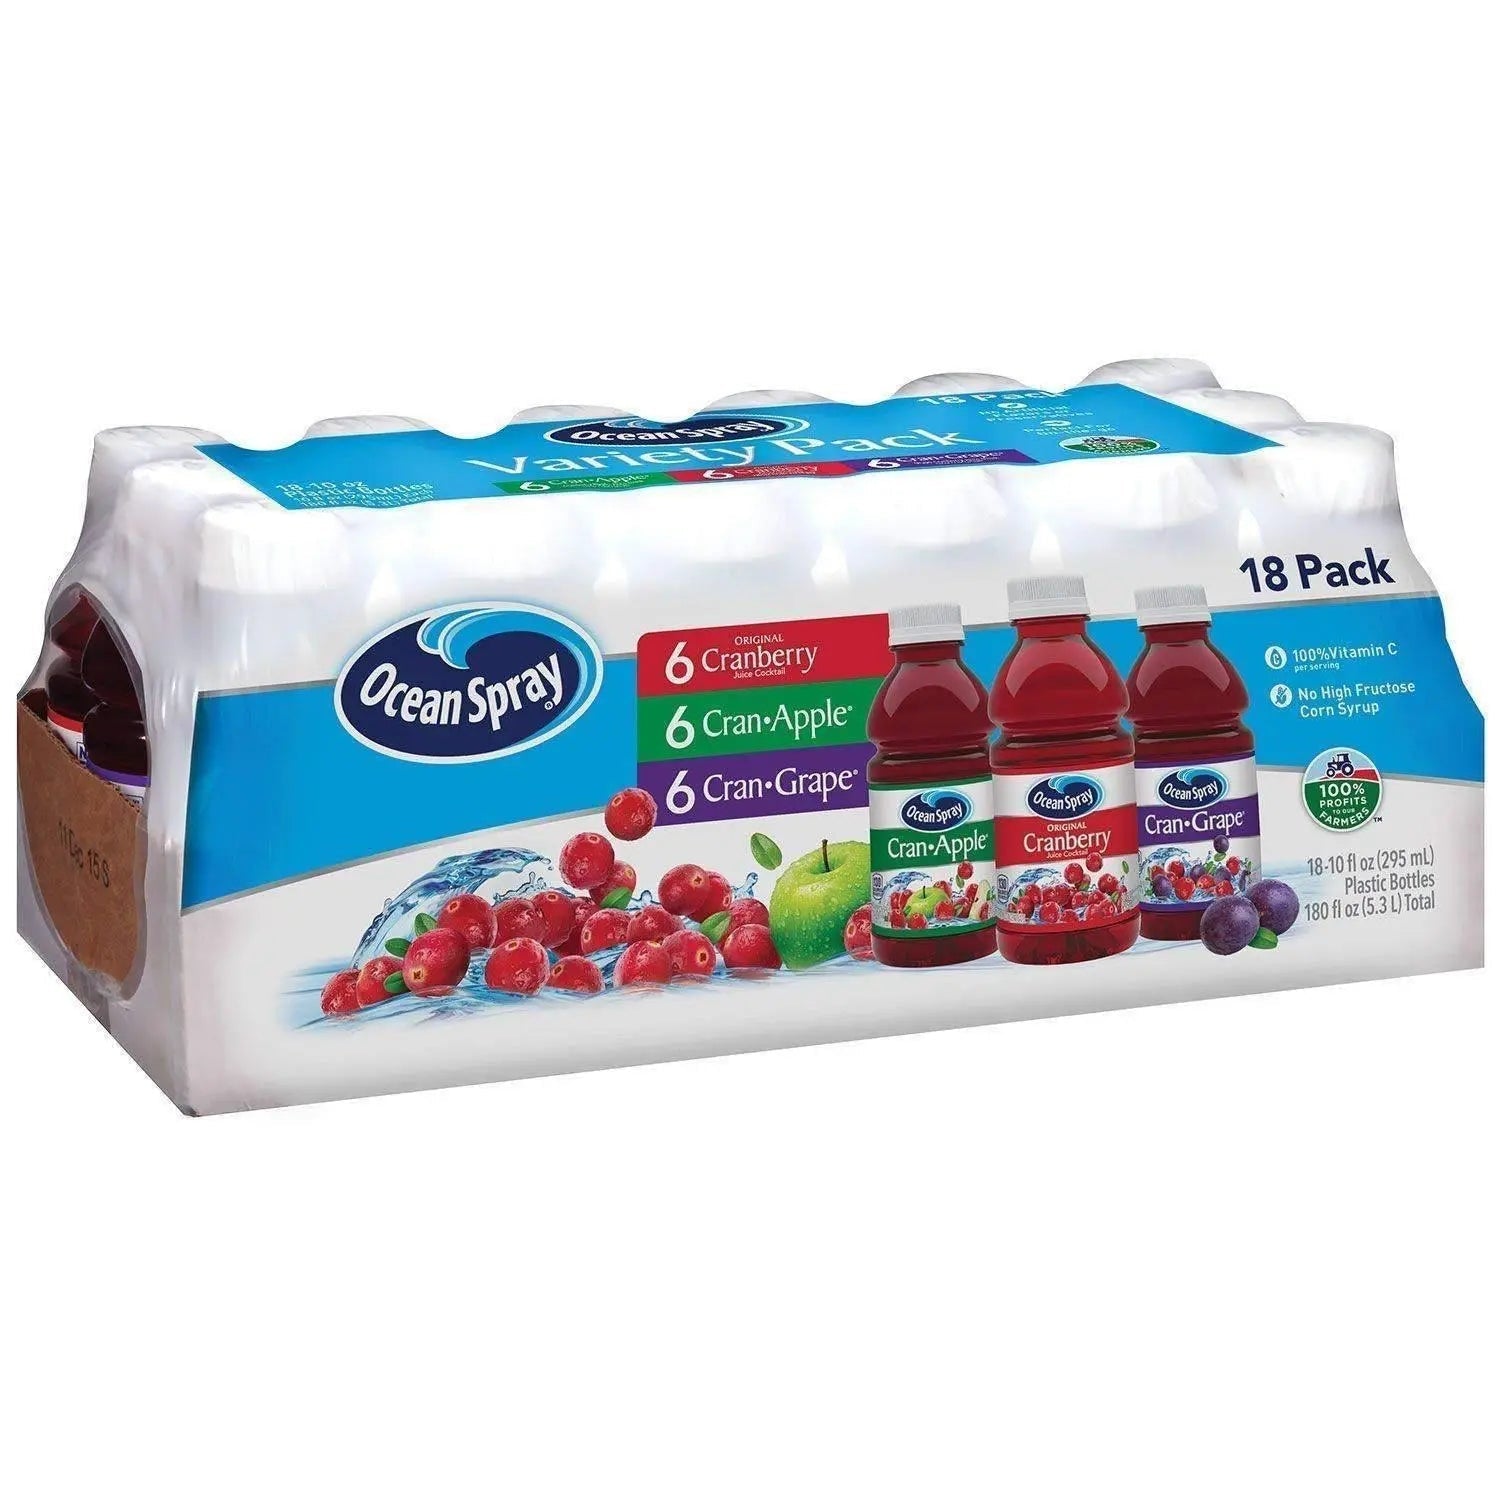 Wholesale prices with free shipping all over United States Ocean Spray Juice Drink Variety Pack (Pack of 2) - Steven Deals